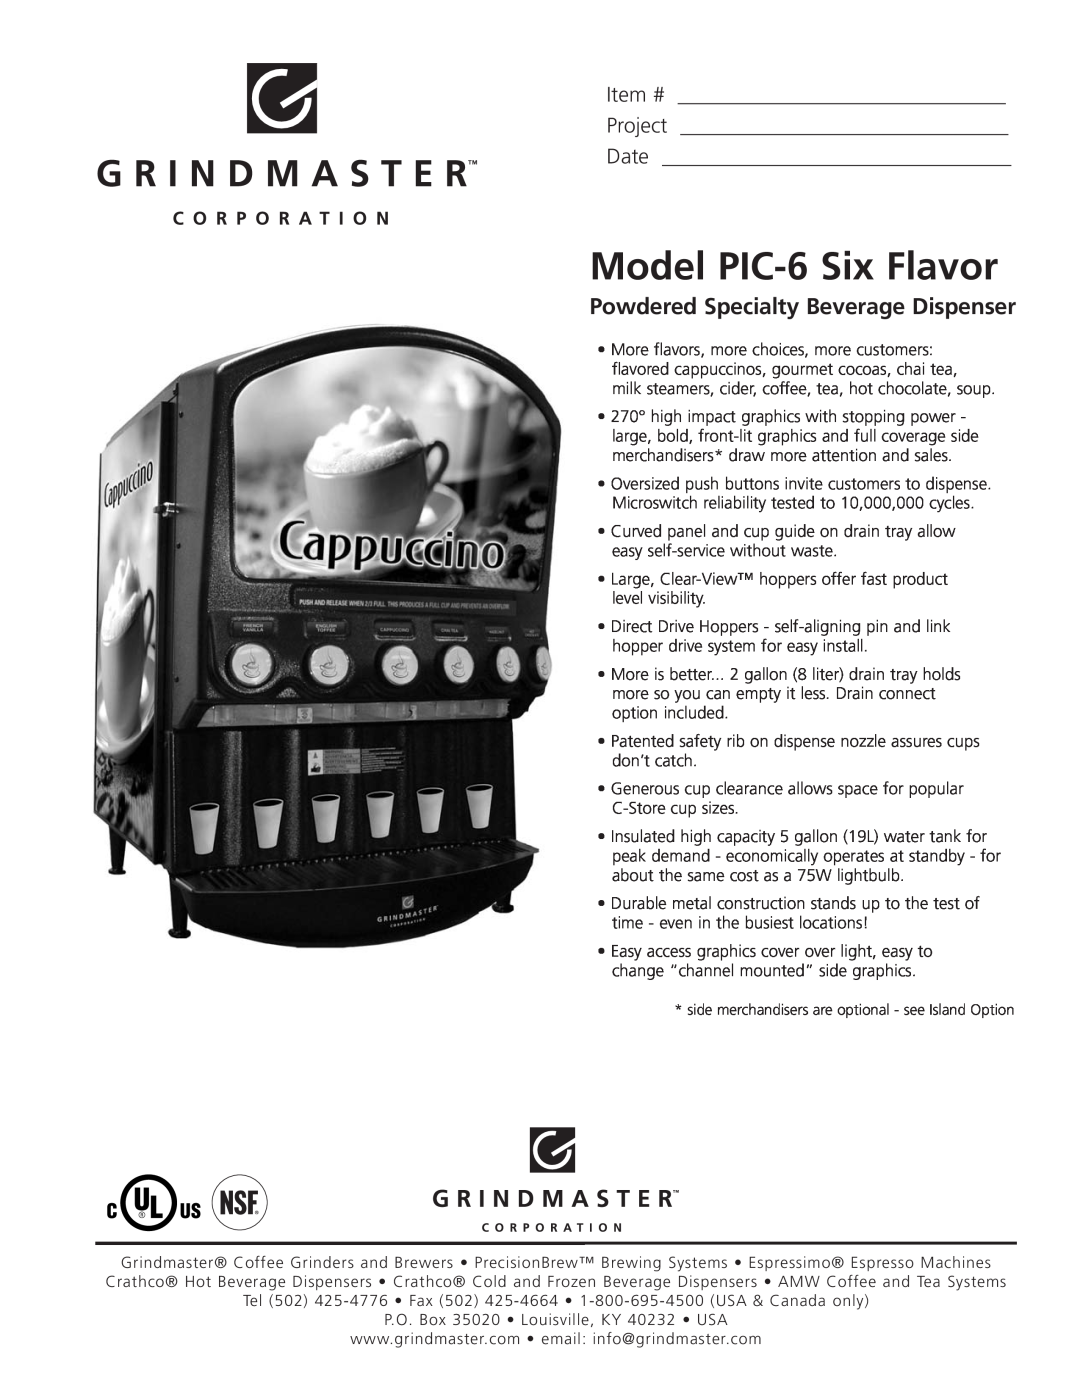 Grindmaster manual Model PIC-6Six Flavor, Powdered Specialty Beverage Dispenser, Item #, Project, Date 